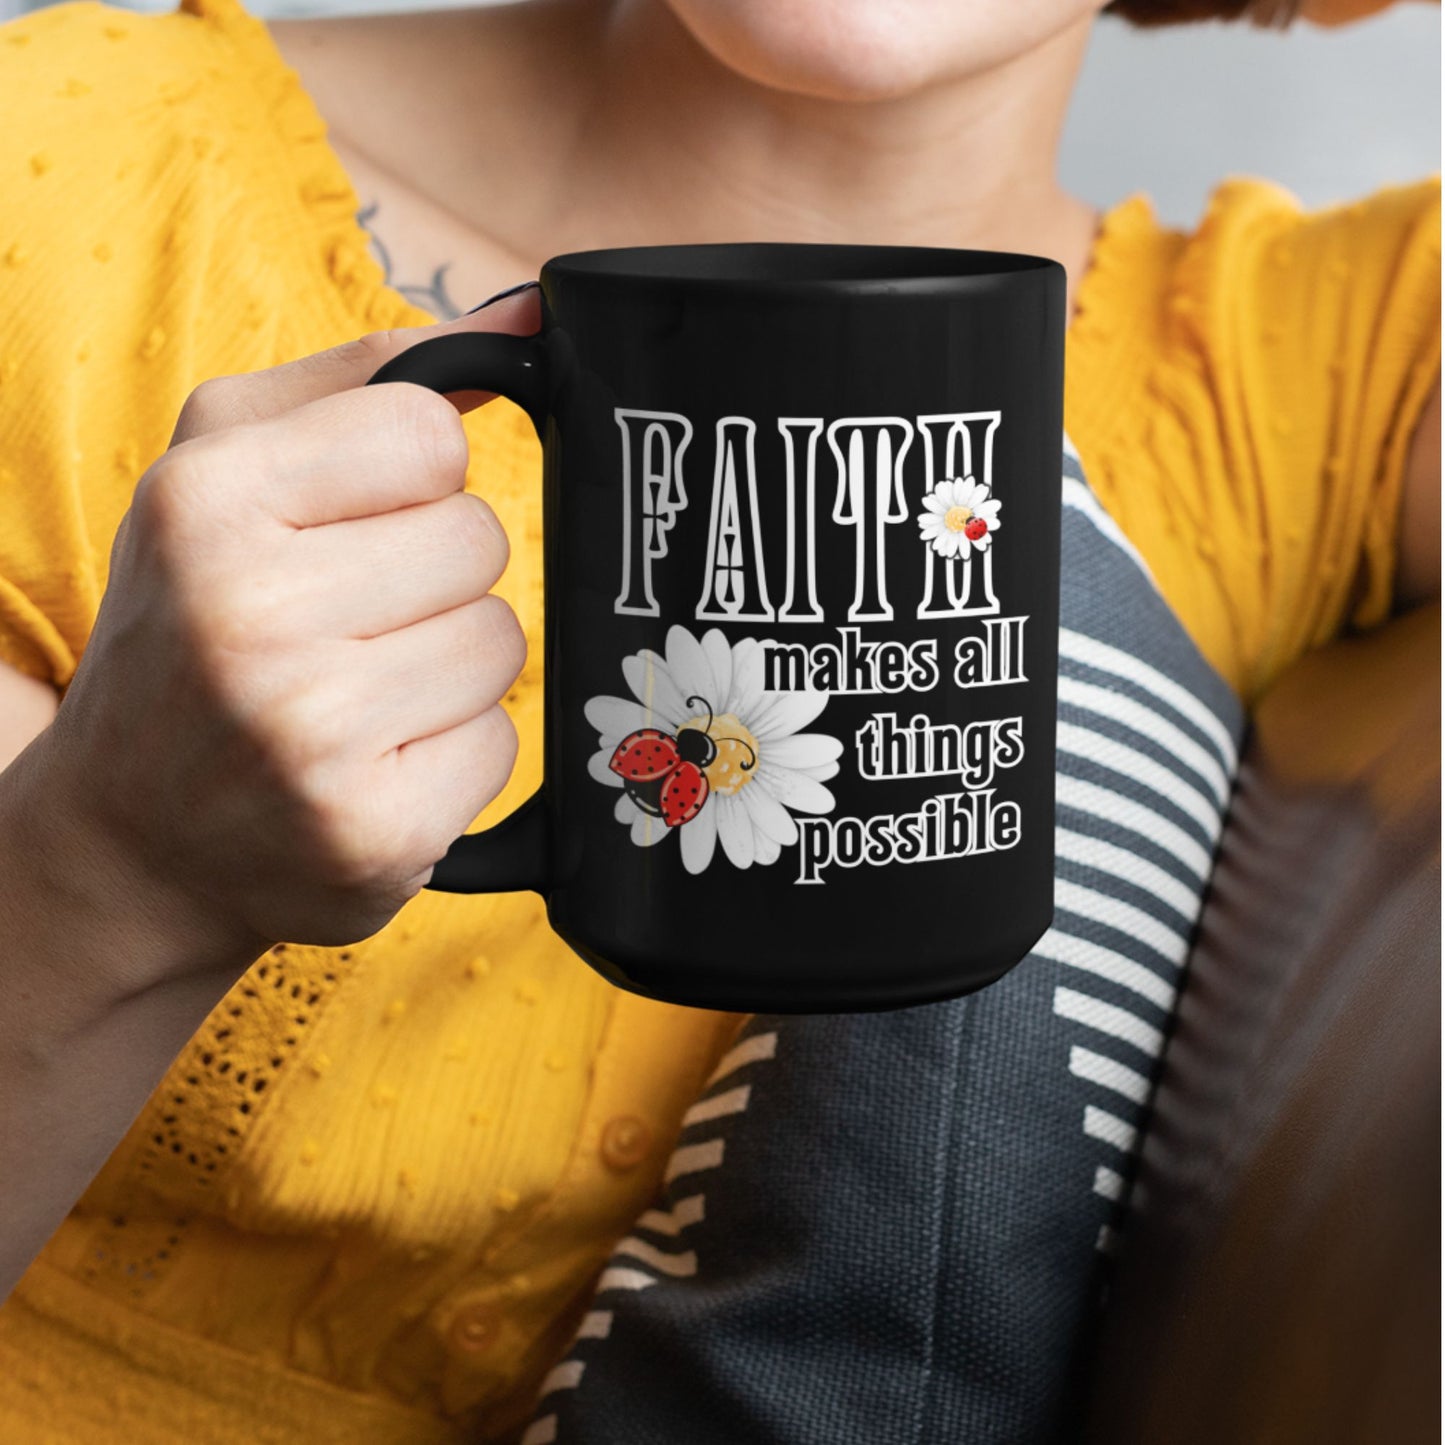 Personalized Christian Women's Mug - Faith Makes Things Possible